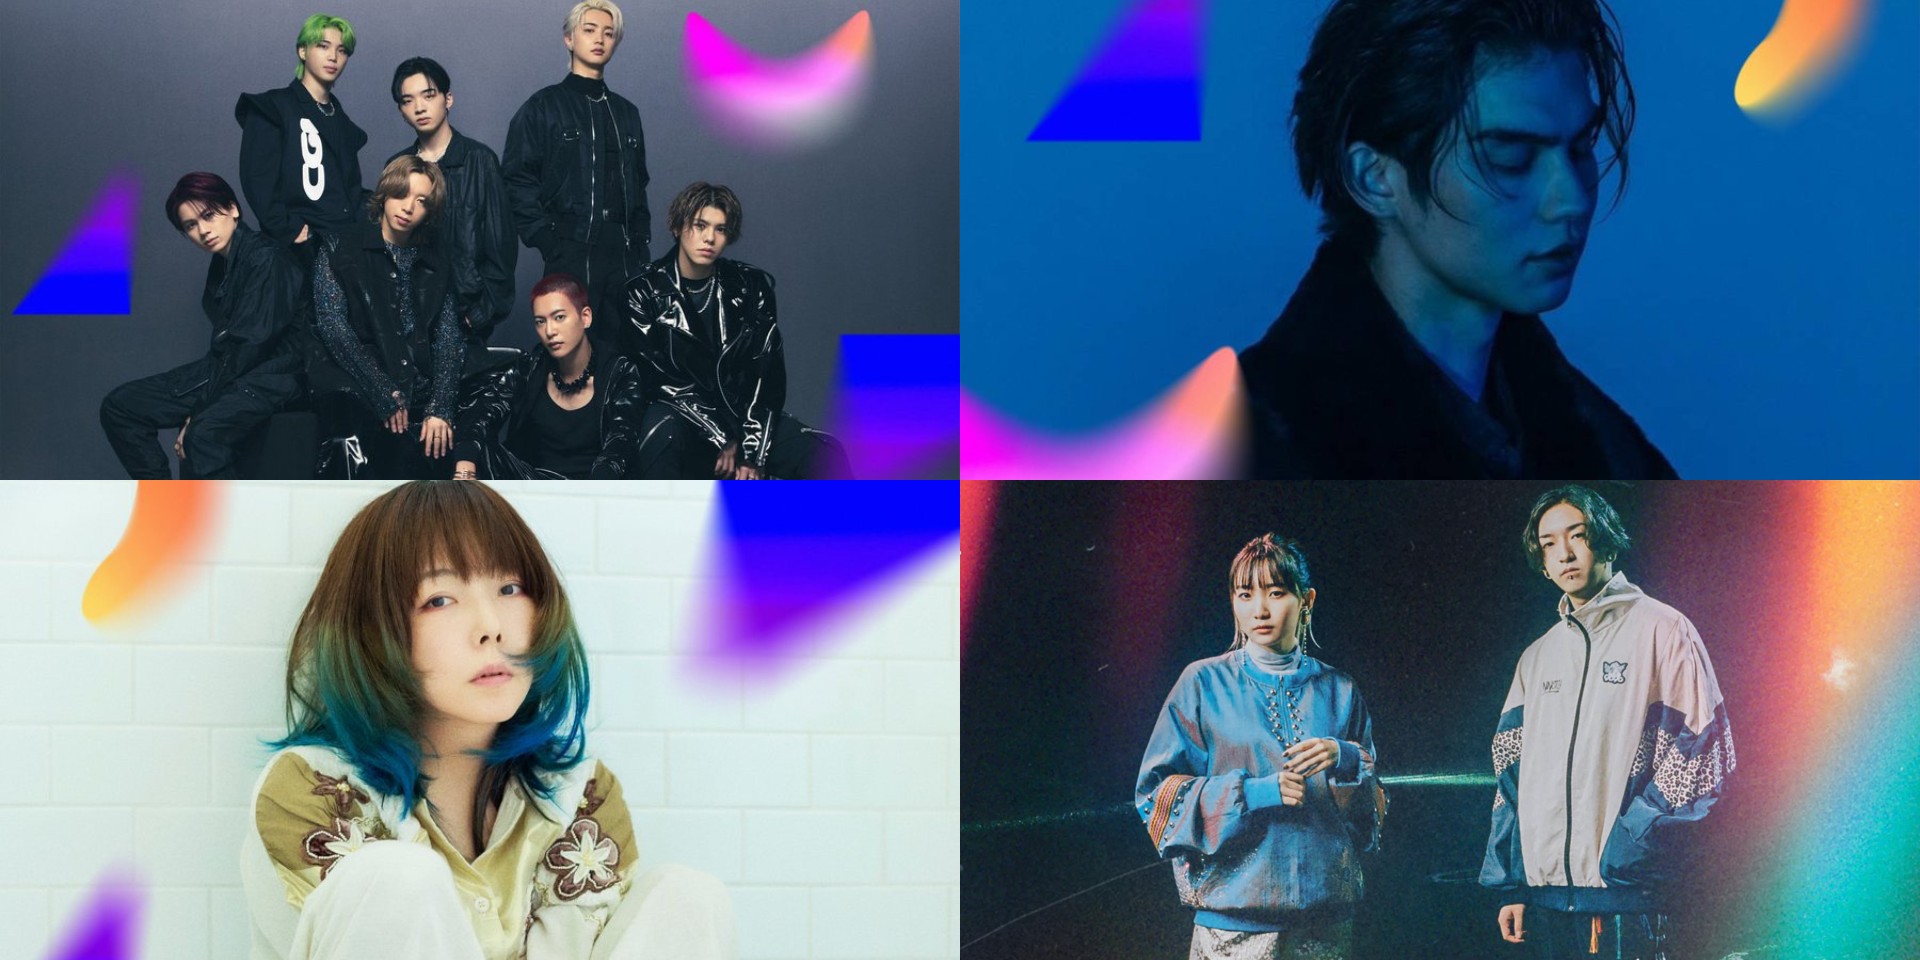 Here are the winners of the 2023 MTV VMAs Japan – BE:FIRST, YOASOBI, Bright Vachirawit, aiko, and more